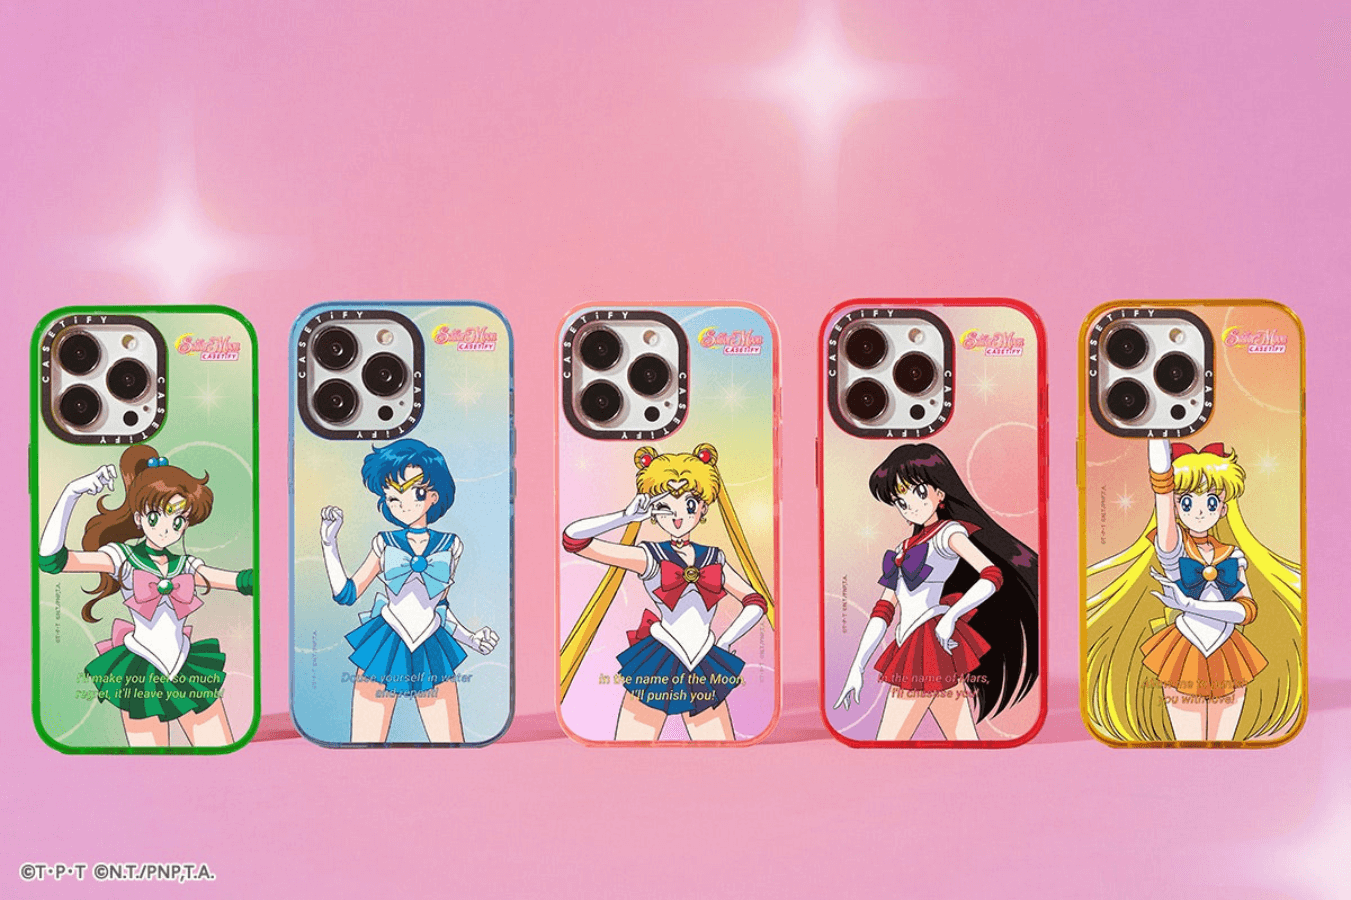 Dress Up Your Tech With The Sailor Moon x CASETiFY Collab